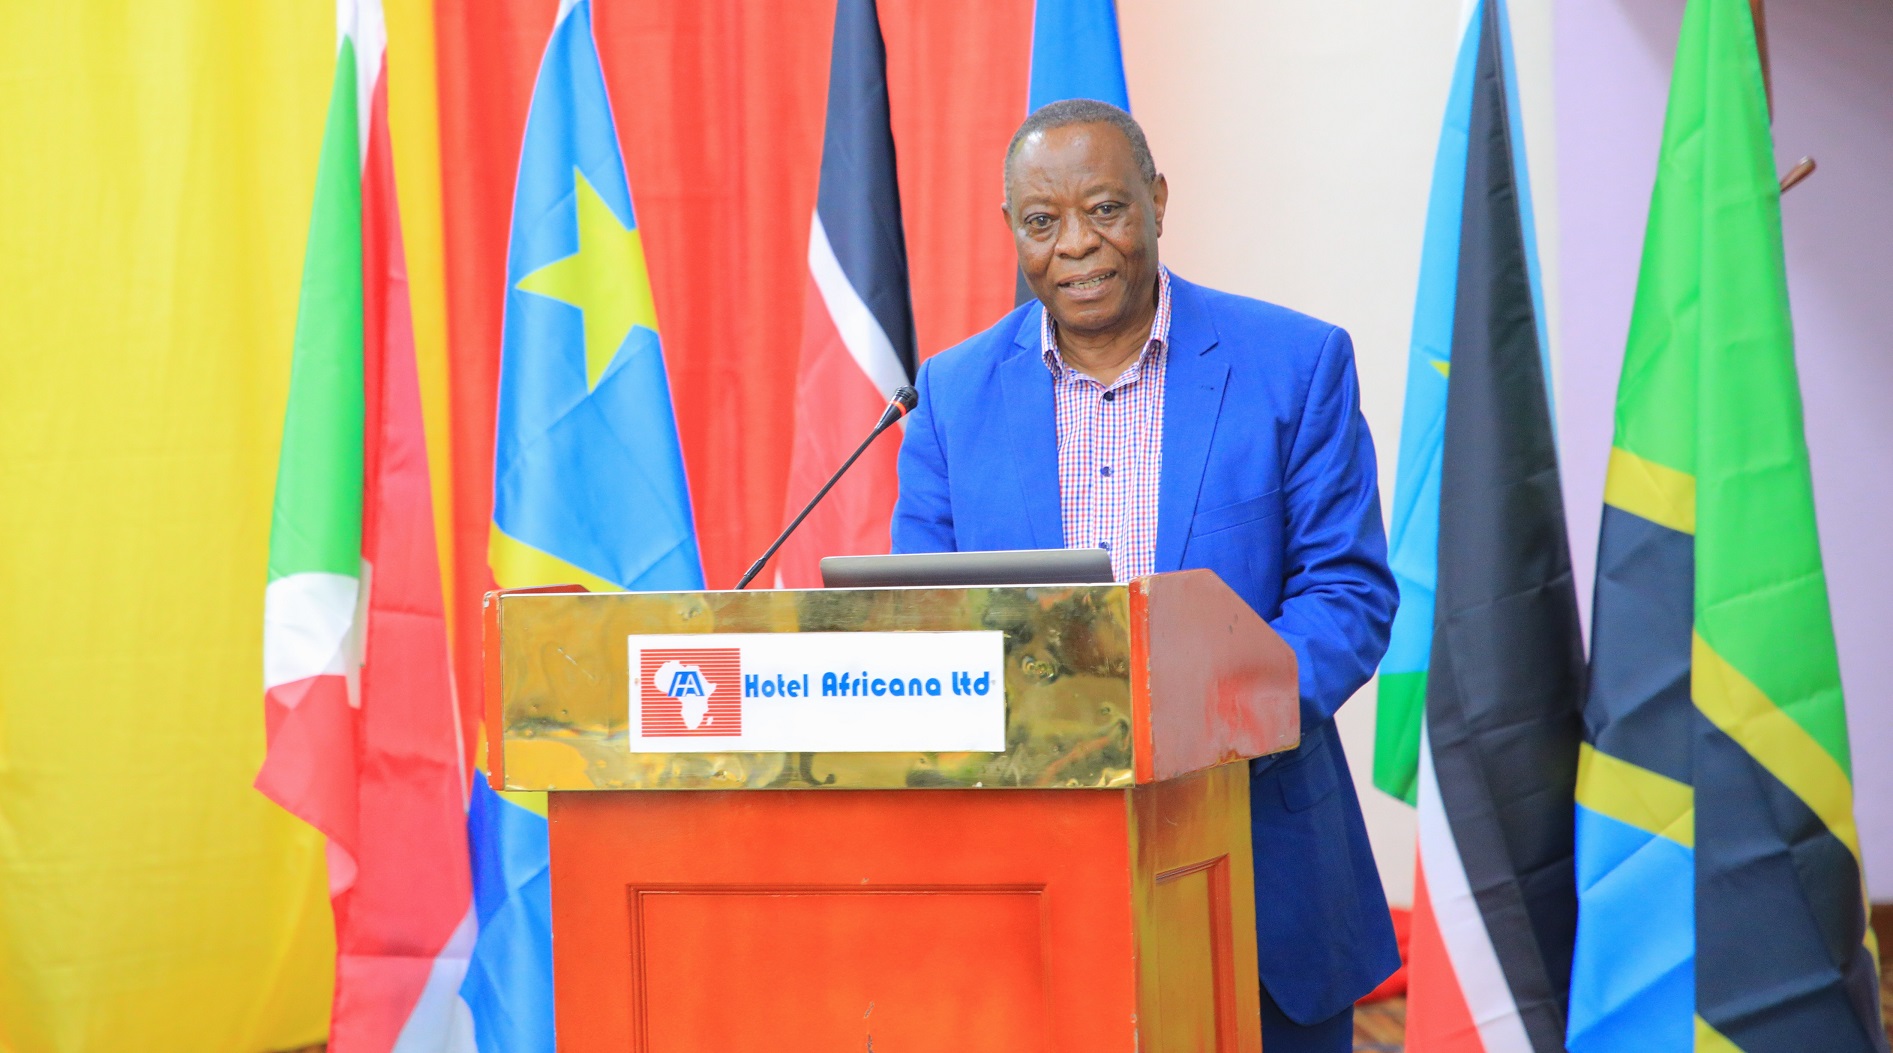  Prof. Fikeni E. M. K Senkoro delivering the keynote address during the official opening session of the 2nd EAC World Kiswahili Day celebrations in Kampala, Uganda. Prof. Senkoro urged Africans to develop Kiswahili and other local languages saying language had become a commodity on the global marketplace.